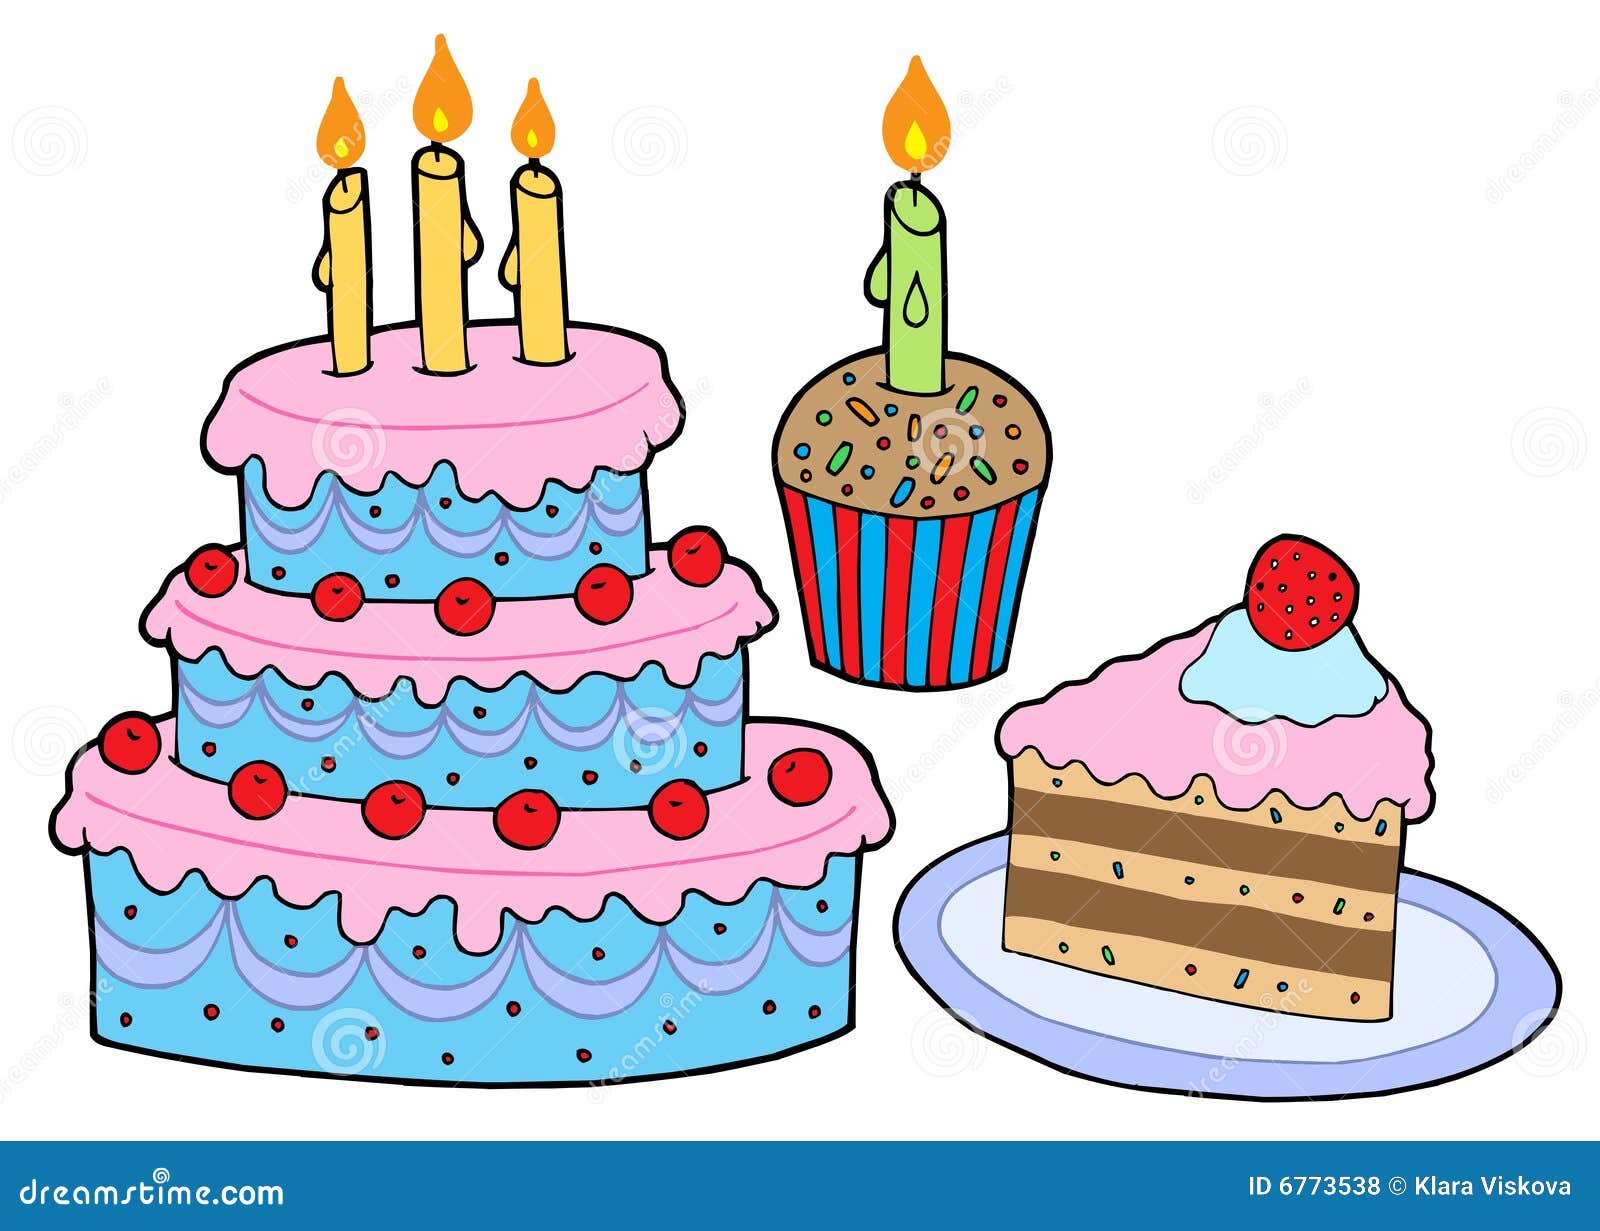 Cake collection stock vector. Illustration of candy, colors - 6773538